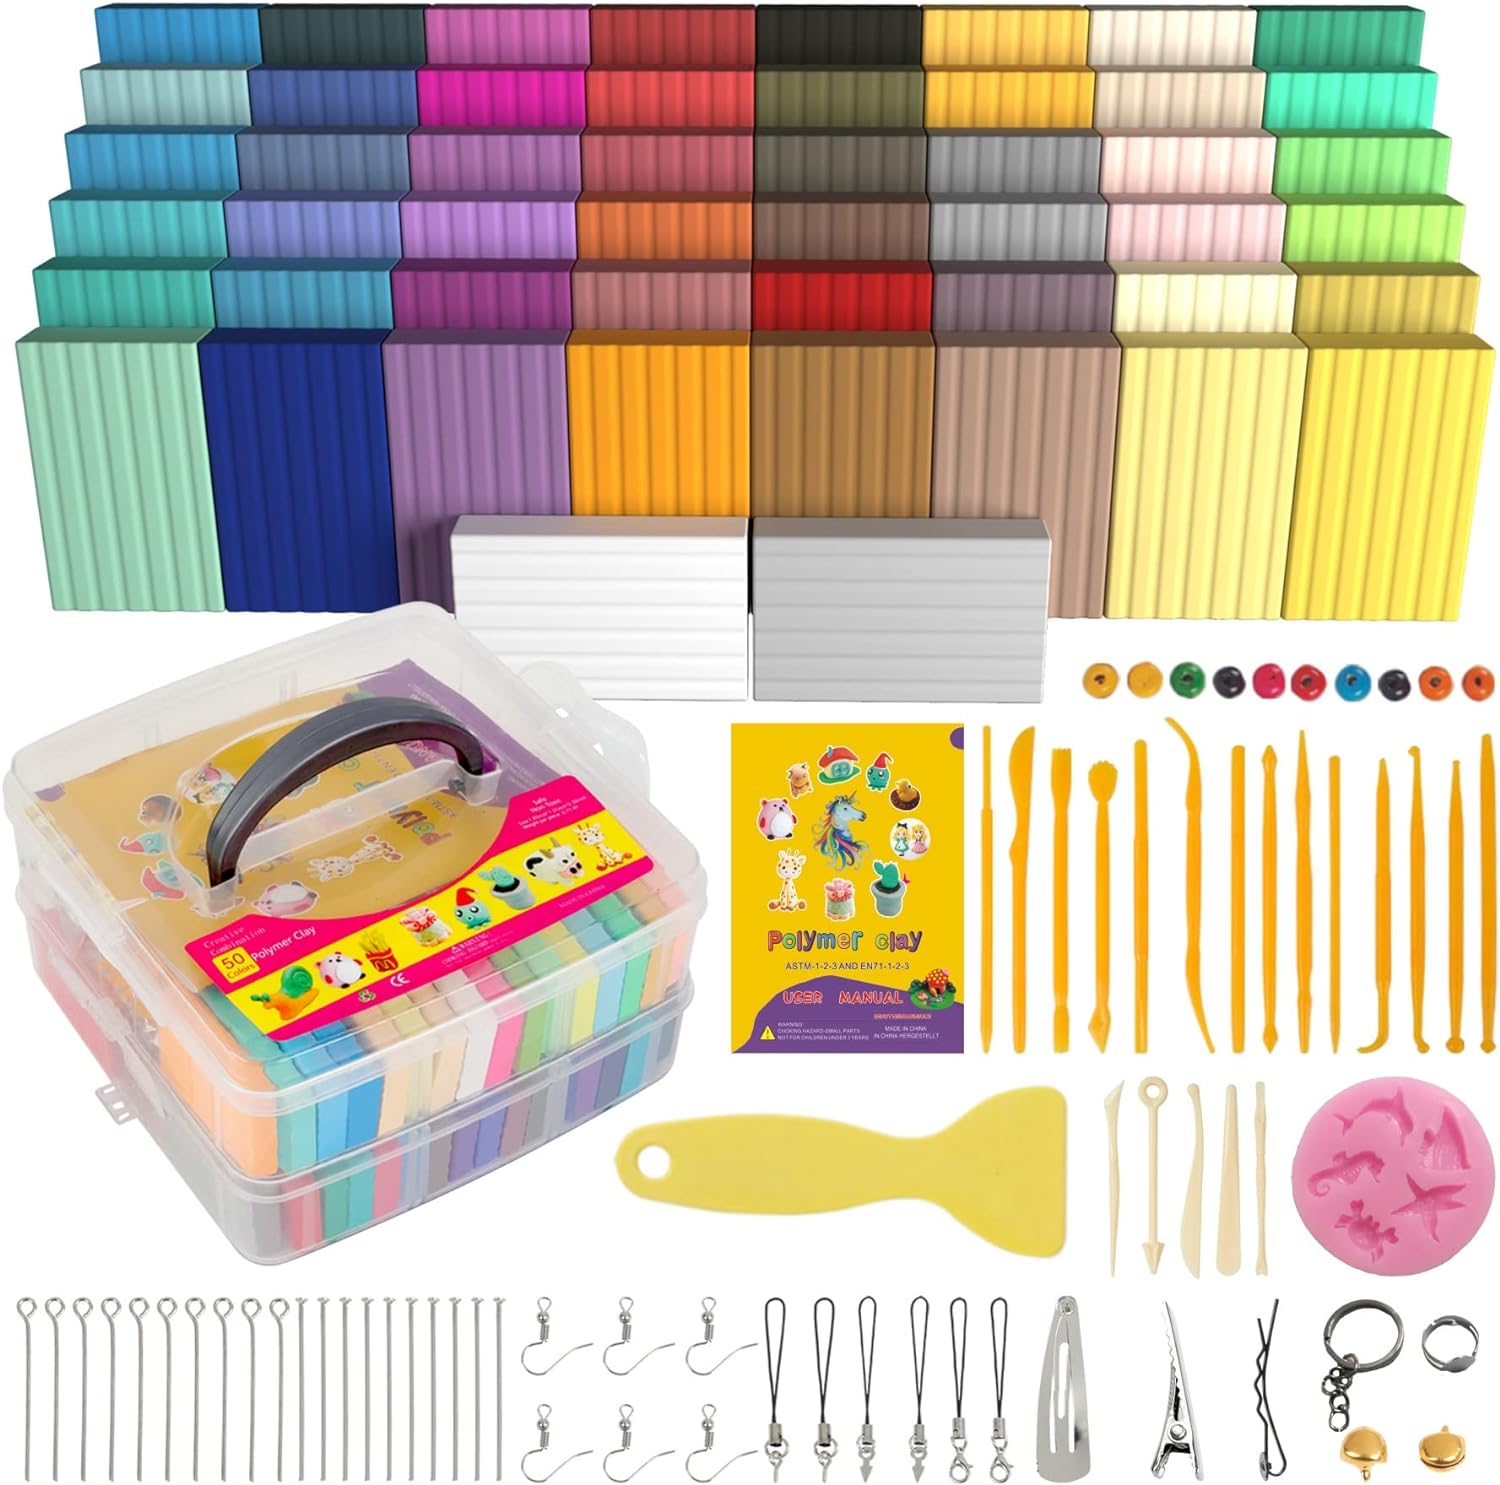 Non-Toxic,Ideal DIY Craft Gifts for Kids Modeling Polymer Clay Kit,50 Colors Ultra Soft & Stretchable Baking Magic Clay with Tools Accessories,Non-Stick